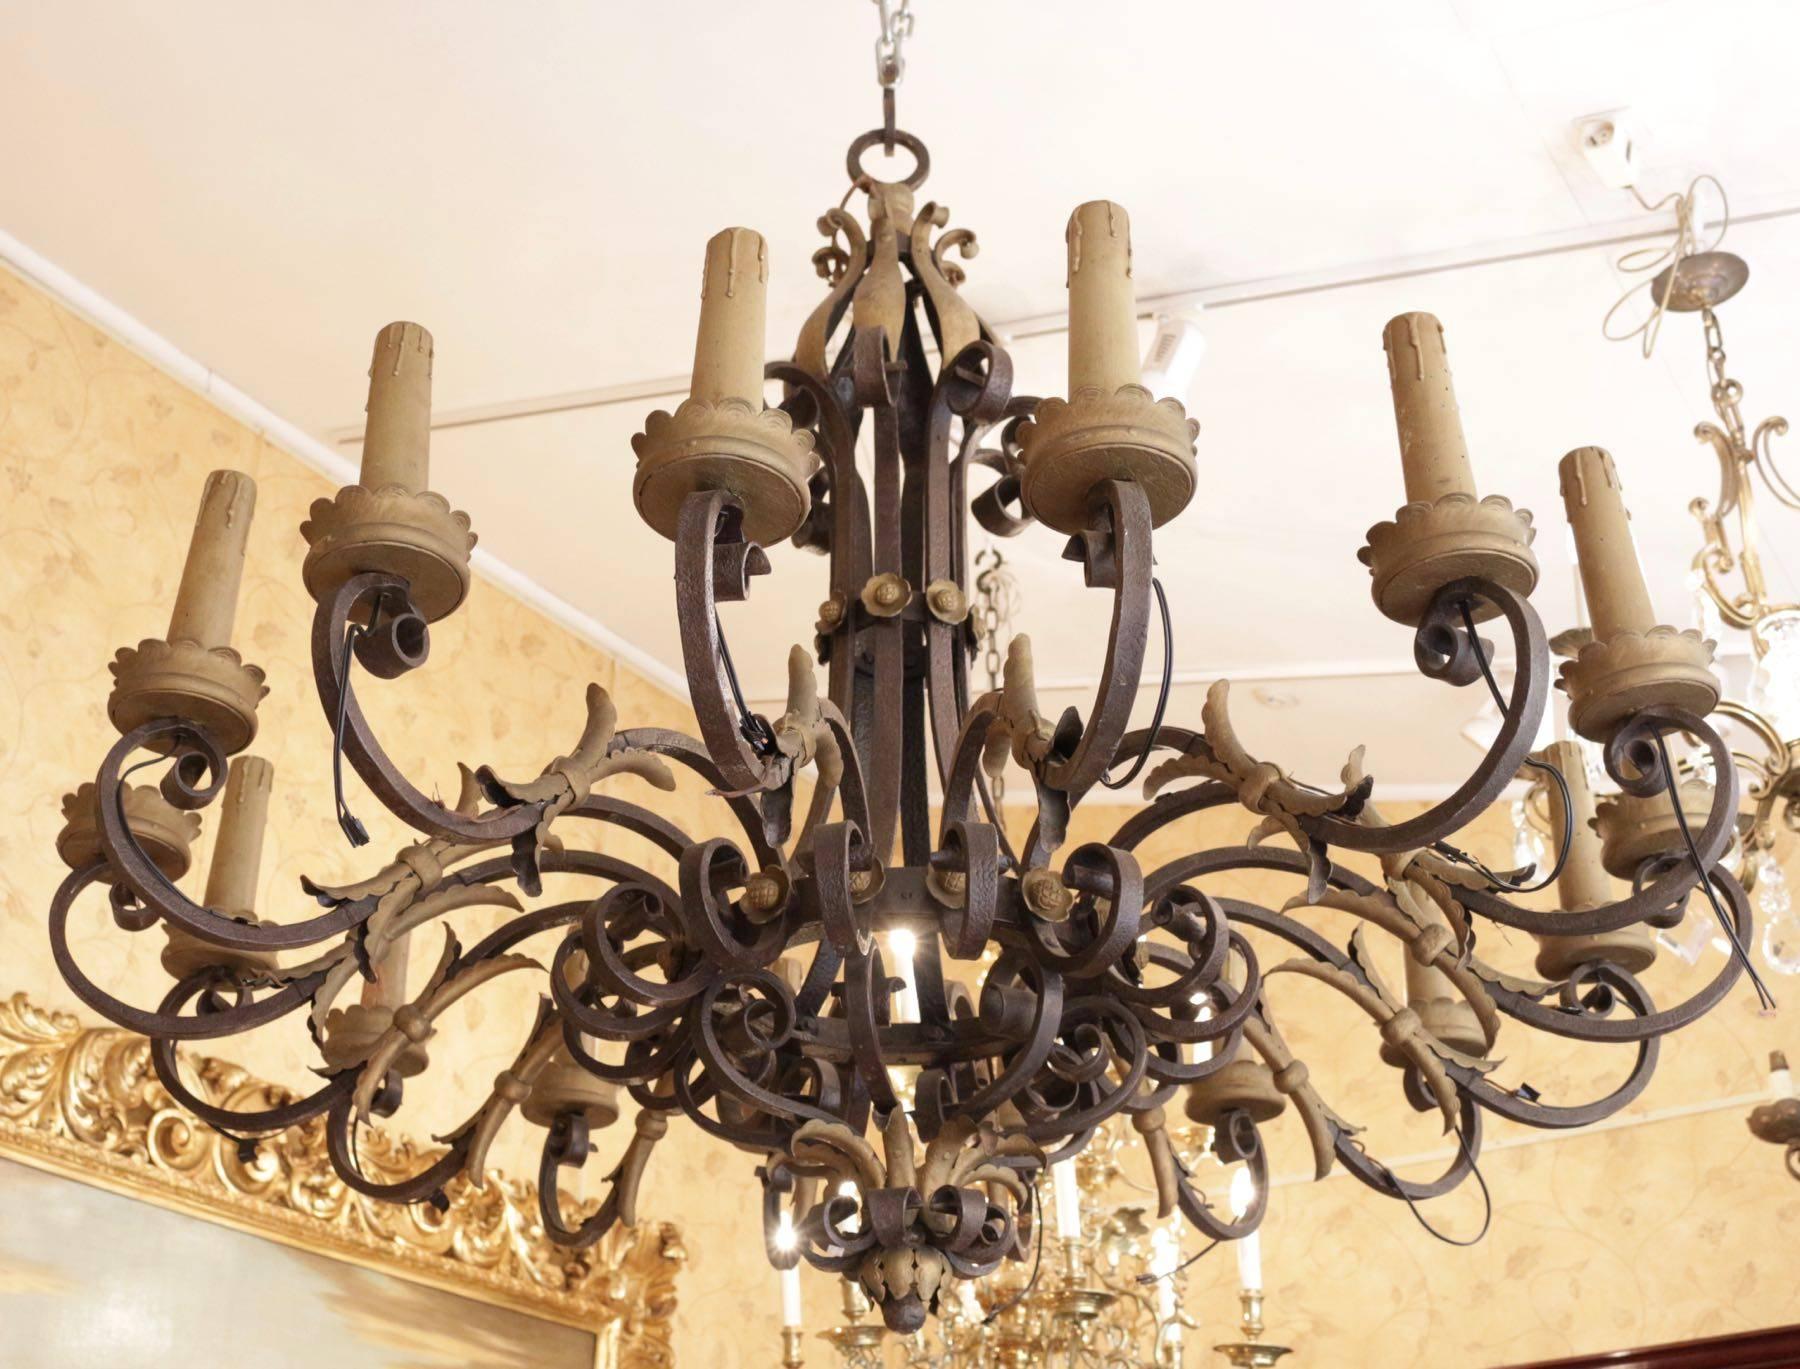 Spanish Colonial Large French Wrought Iron Sixteen-Branch Chandelier